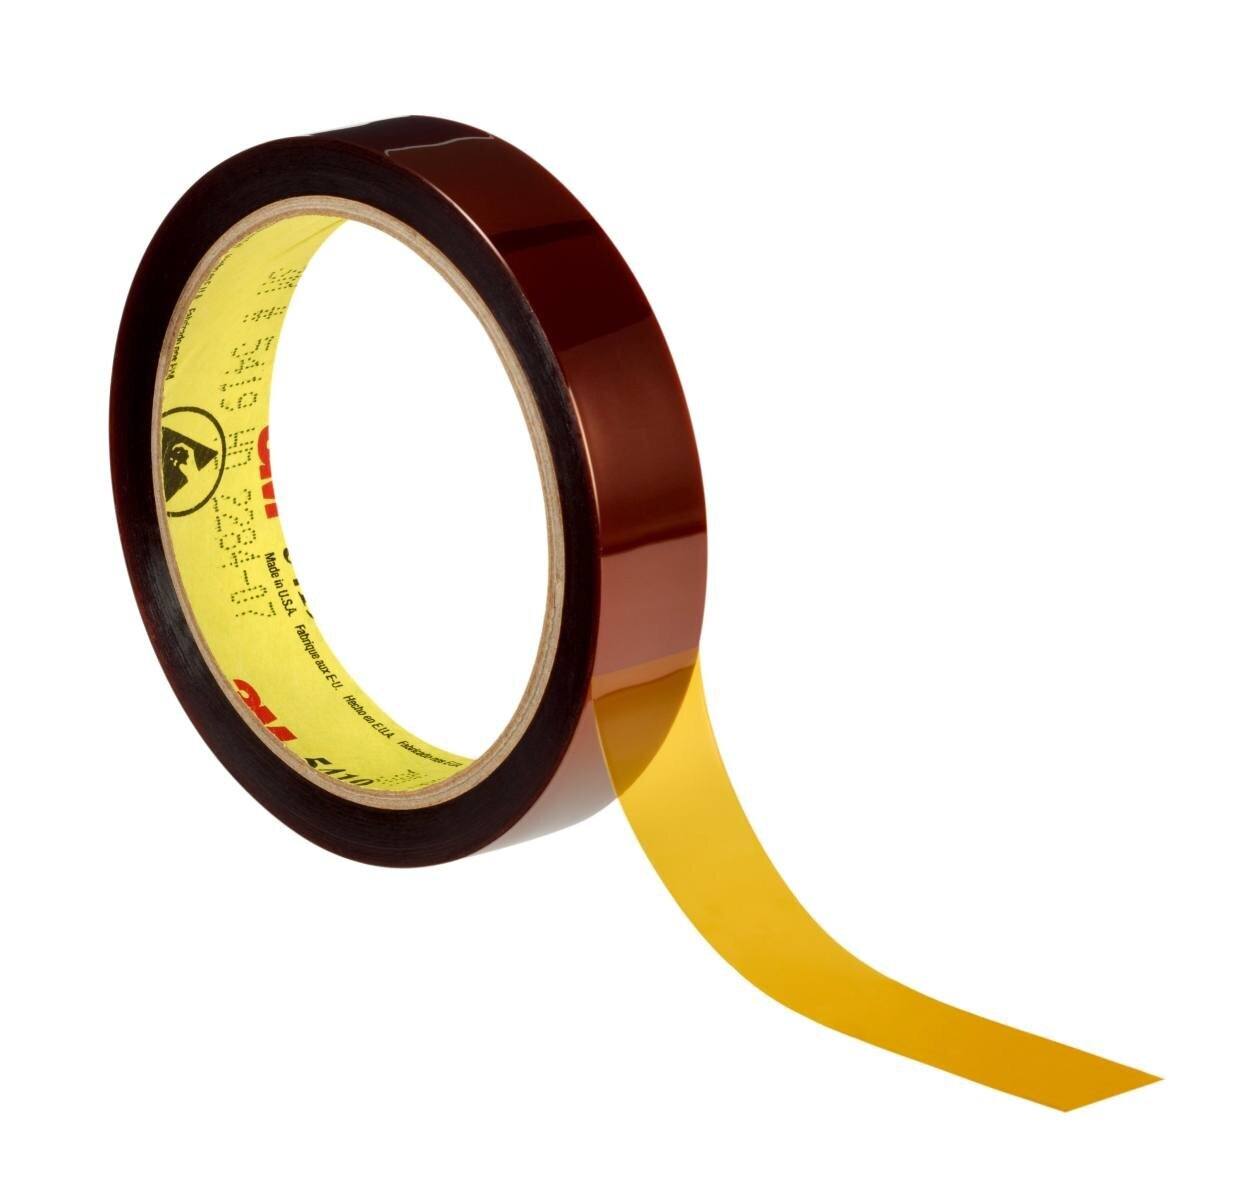 3M High Temperature Polyimide Adhesive Tape 5419, ruskea, 9 mm x 33 m, 68,58 µm.